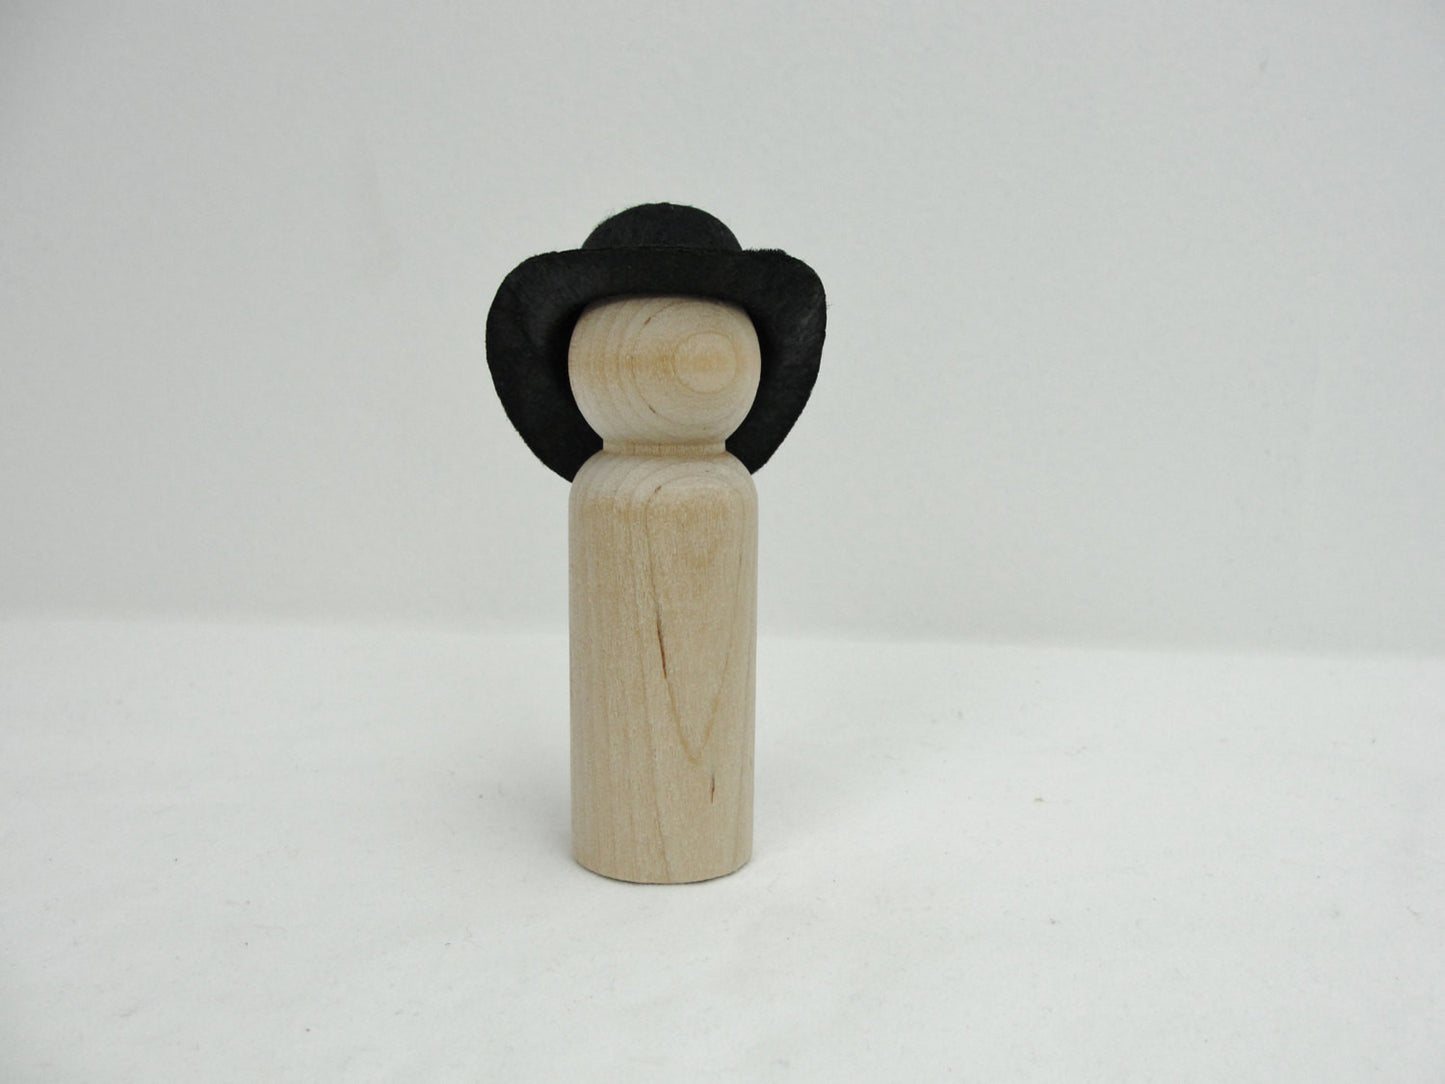 Miniature black cowboy or top hat fits a large peg person - General Crafts - Craft Supply House